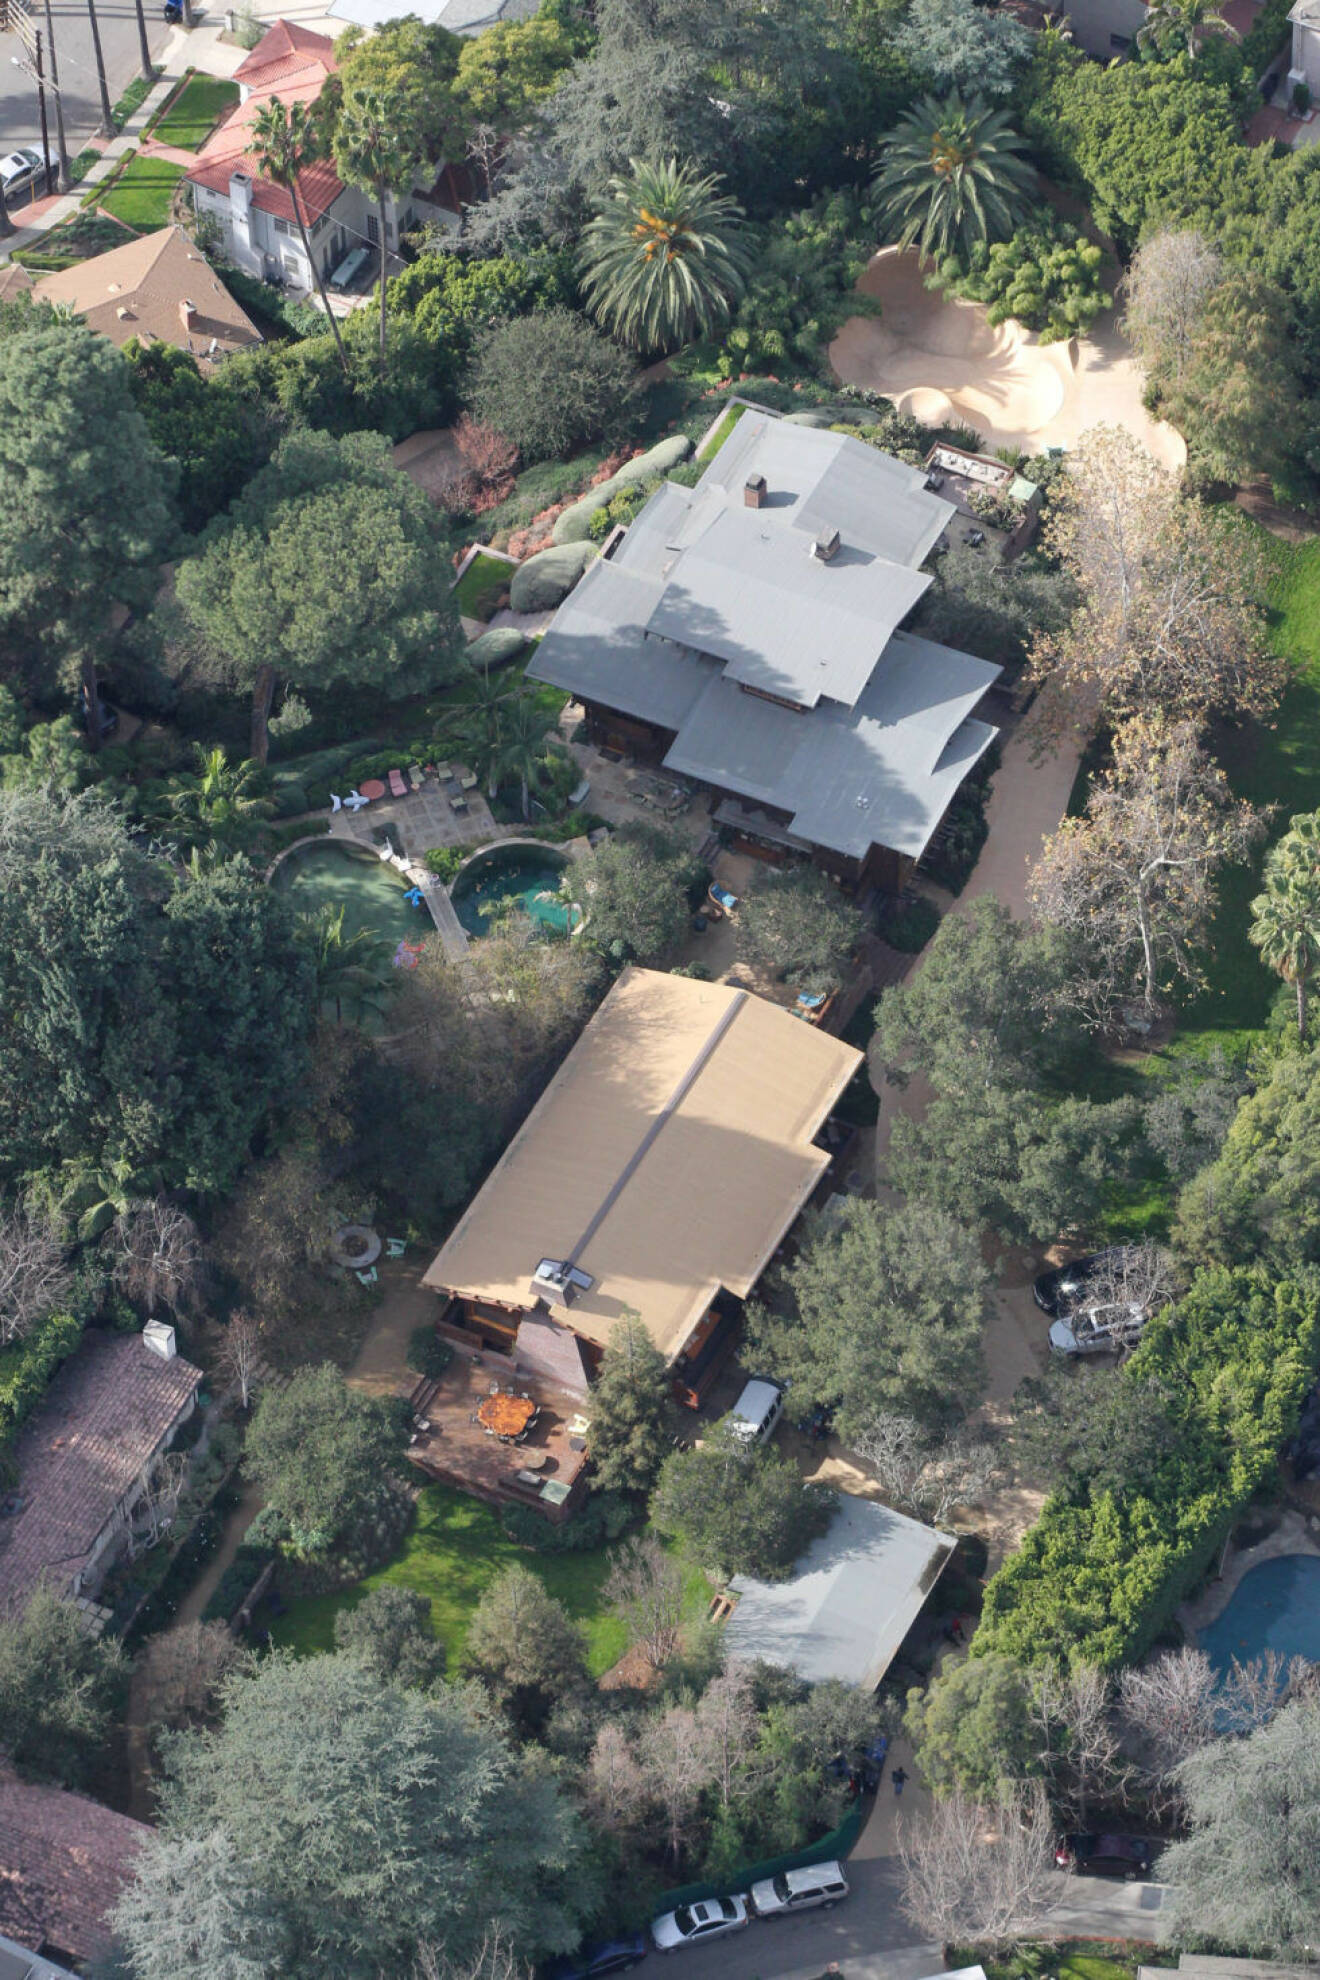 Brad Pitt and Angelina Jolie own this mega-mansion in LAs Los Feliz neighborhood featuring multiple structures, pools, and a full skatepark for their brood